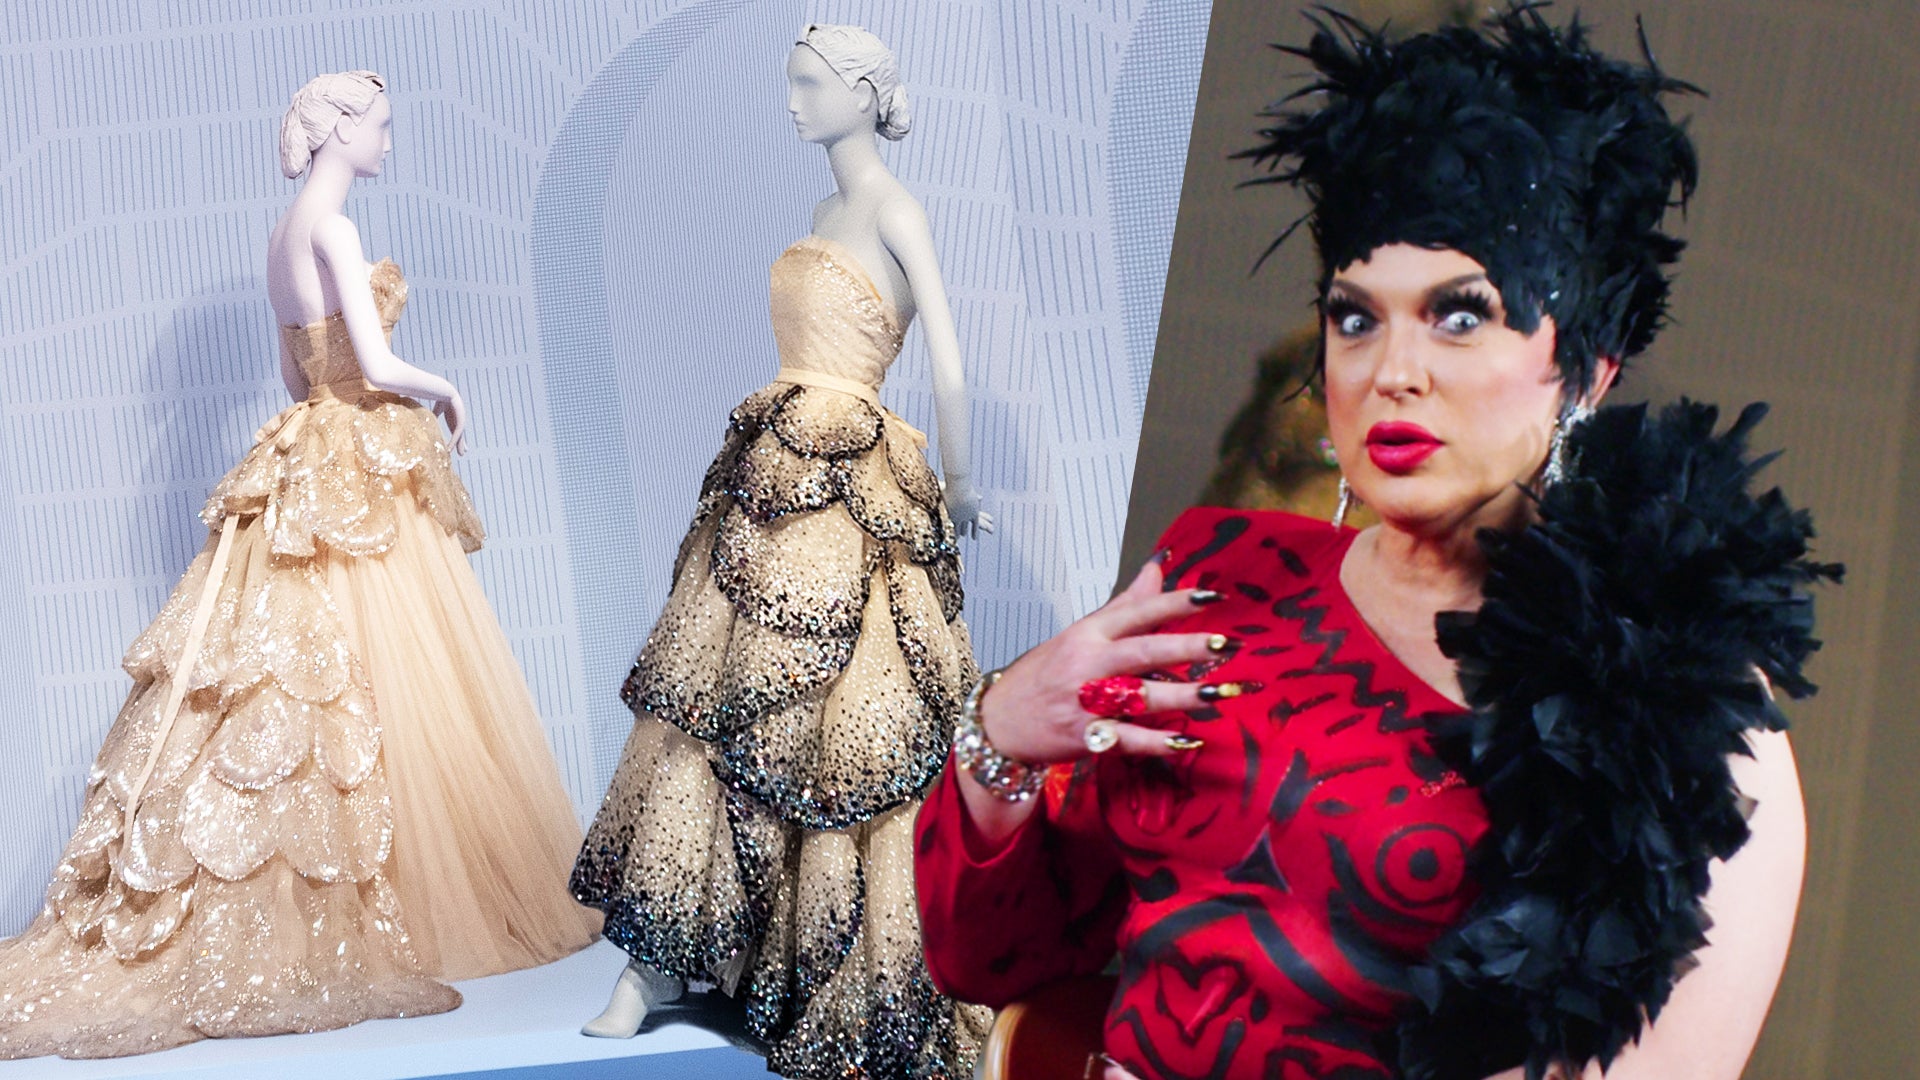 Drag artist D'Arcy Drollinger with dresses in de Young exhibition